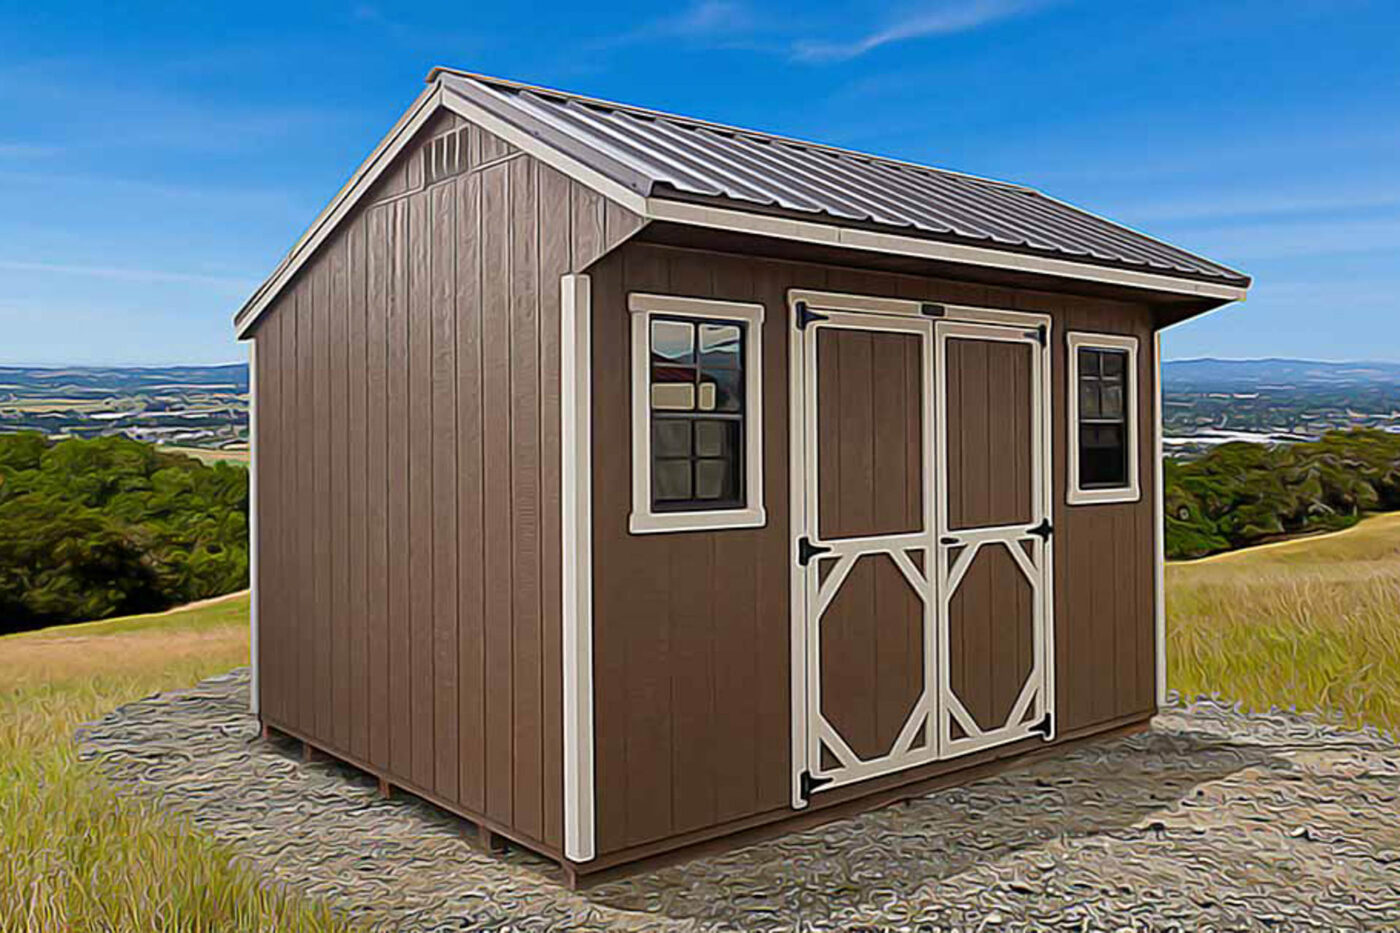 The quaker Storage Shed for sale in Montana